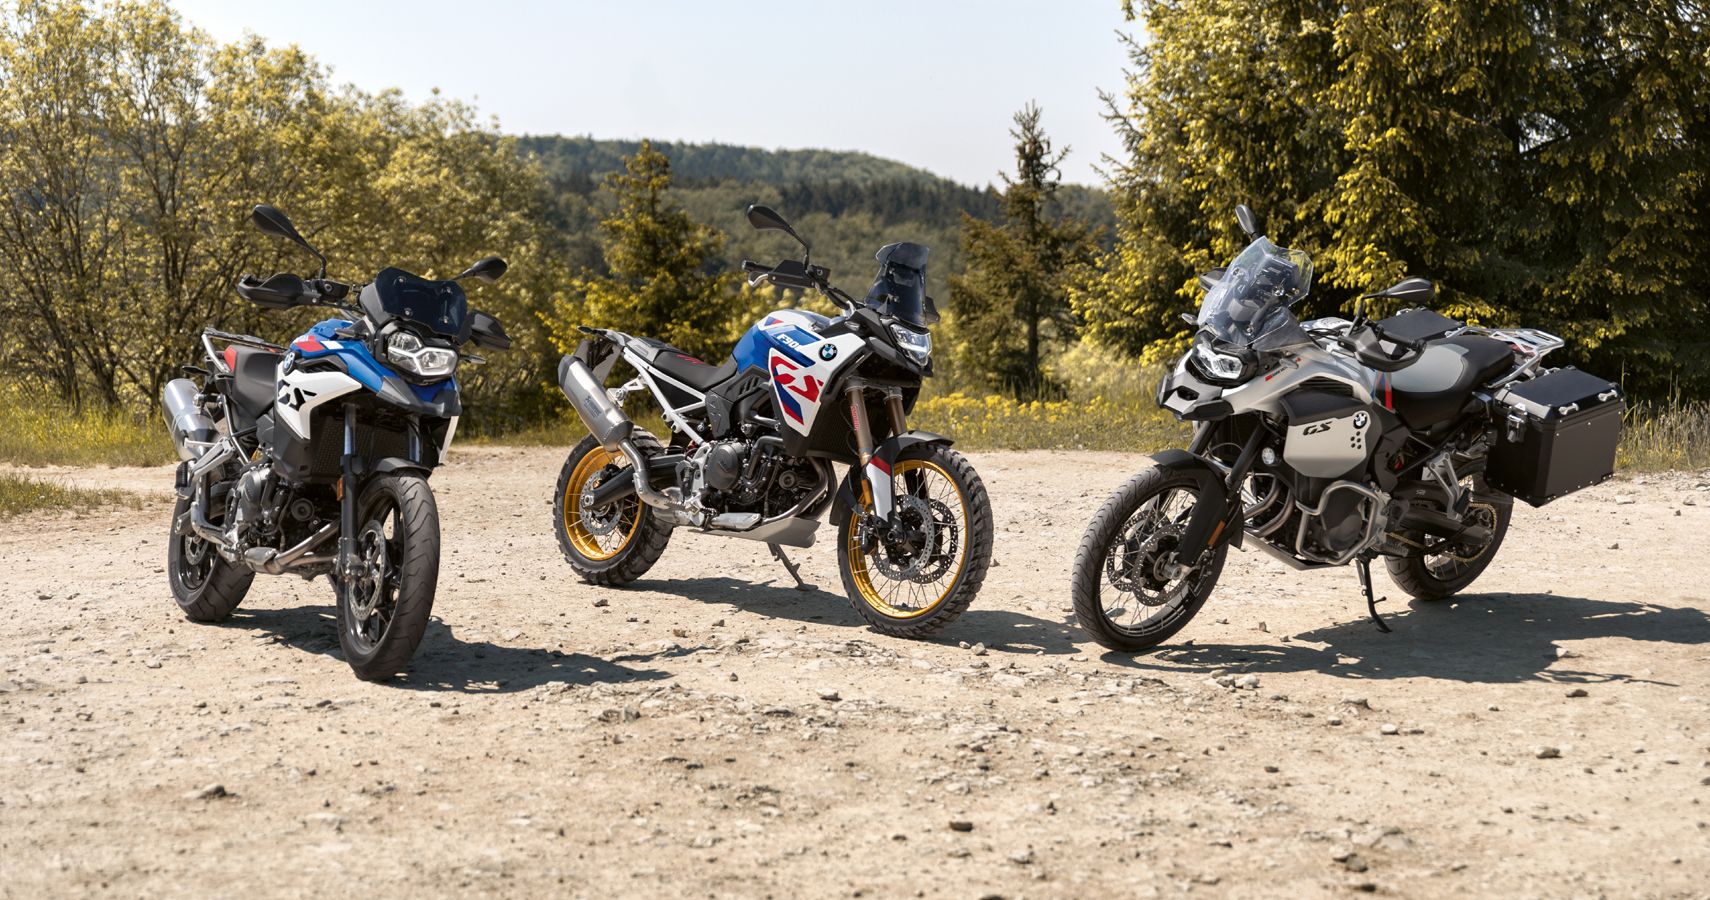 Meet The New Touring Motorcycles From BMW F 900 GS, F 900 GS Adventure